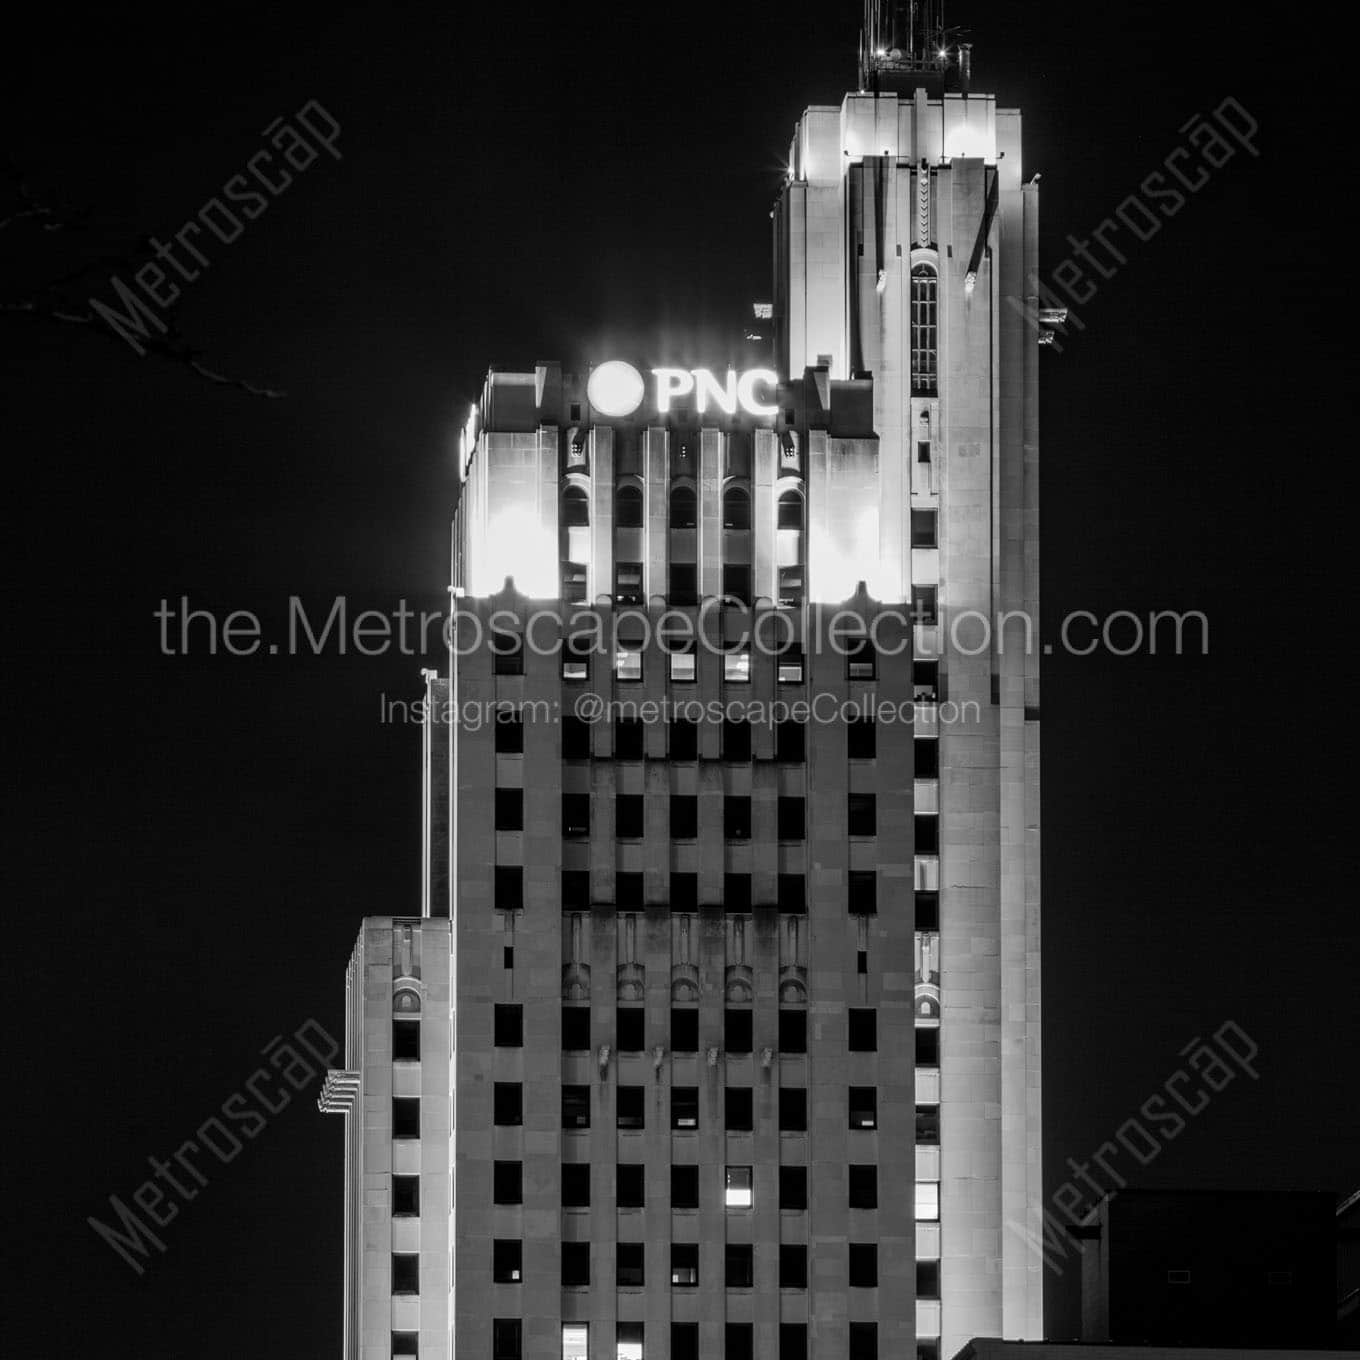 pnc bank building at night Black & White Office Art